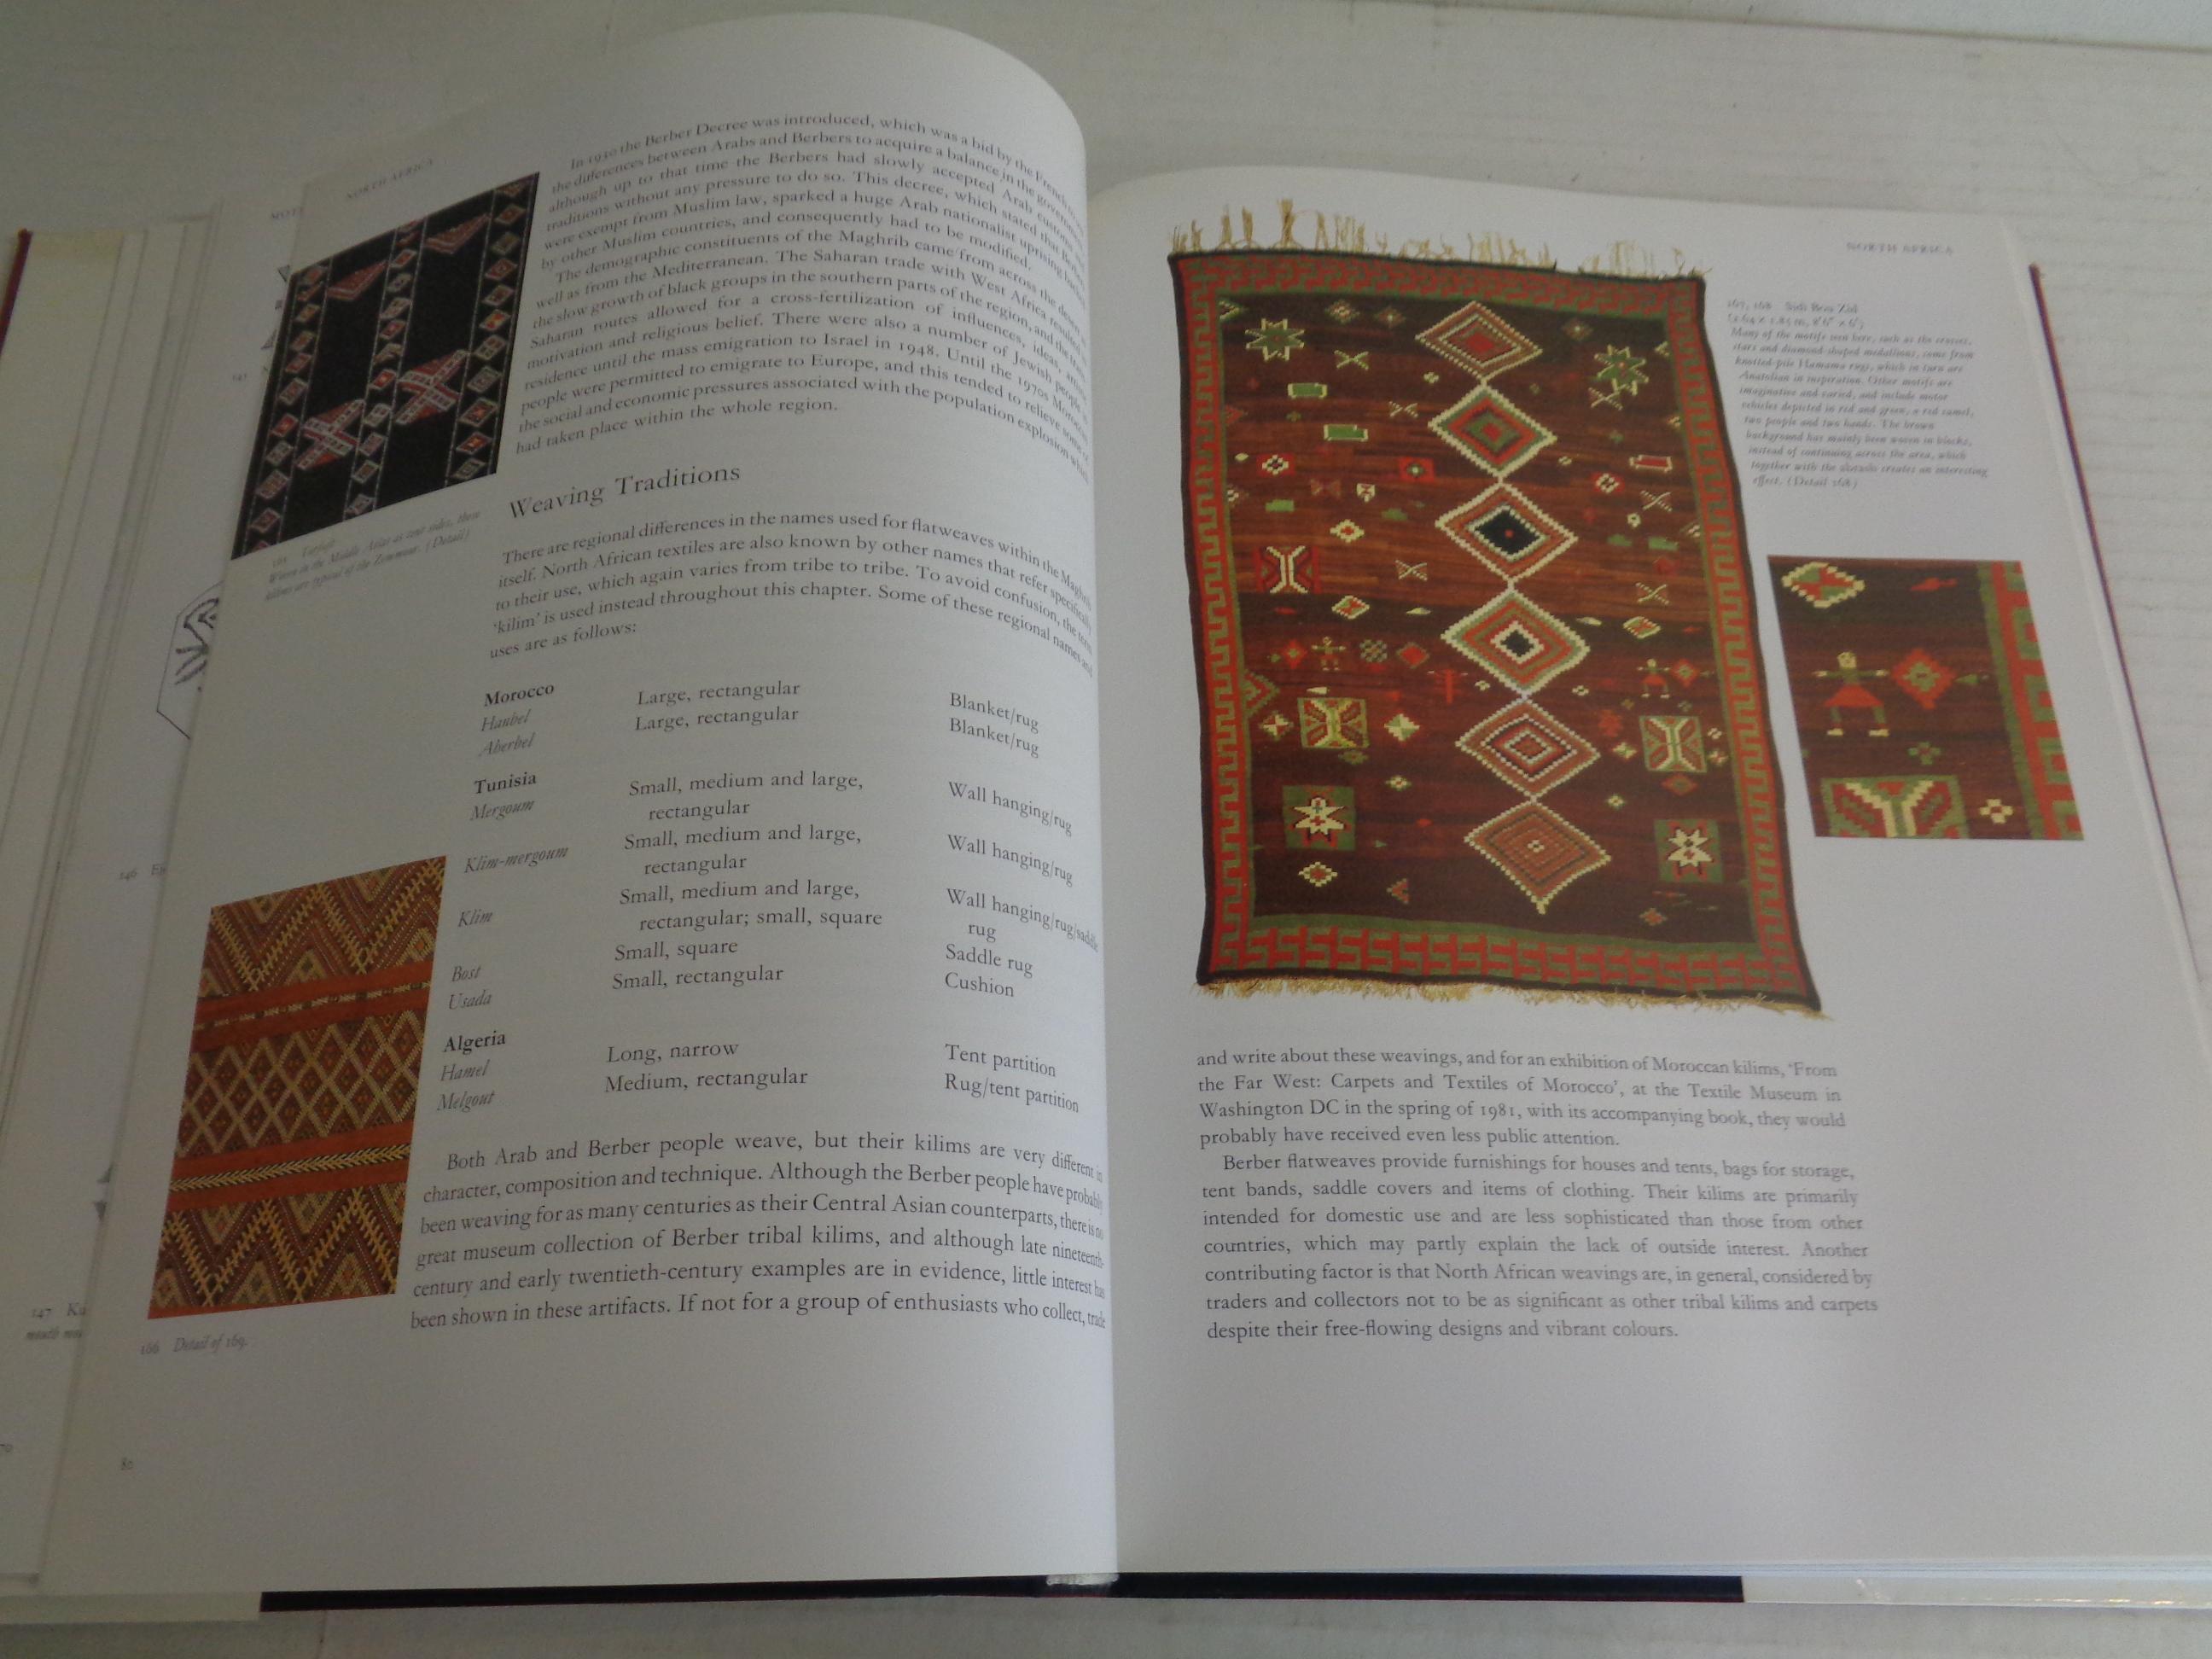 KILIM: The Complete Guide - 1993 Chronicle Books - 1st Edition For Sale 4